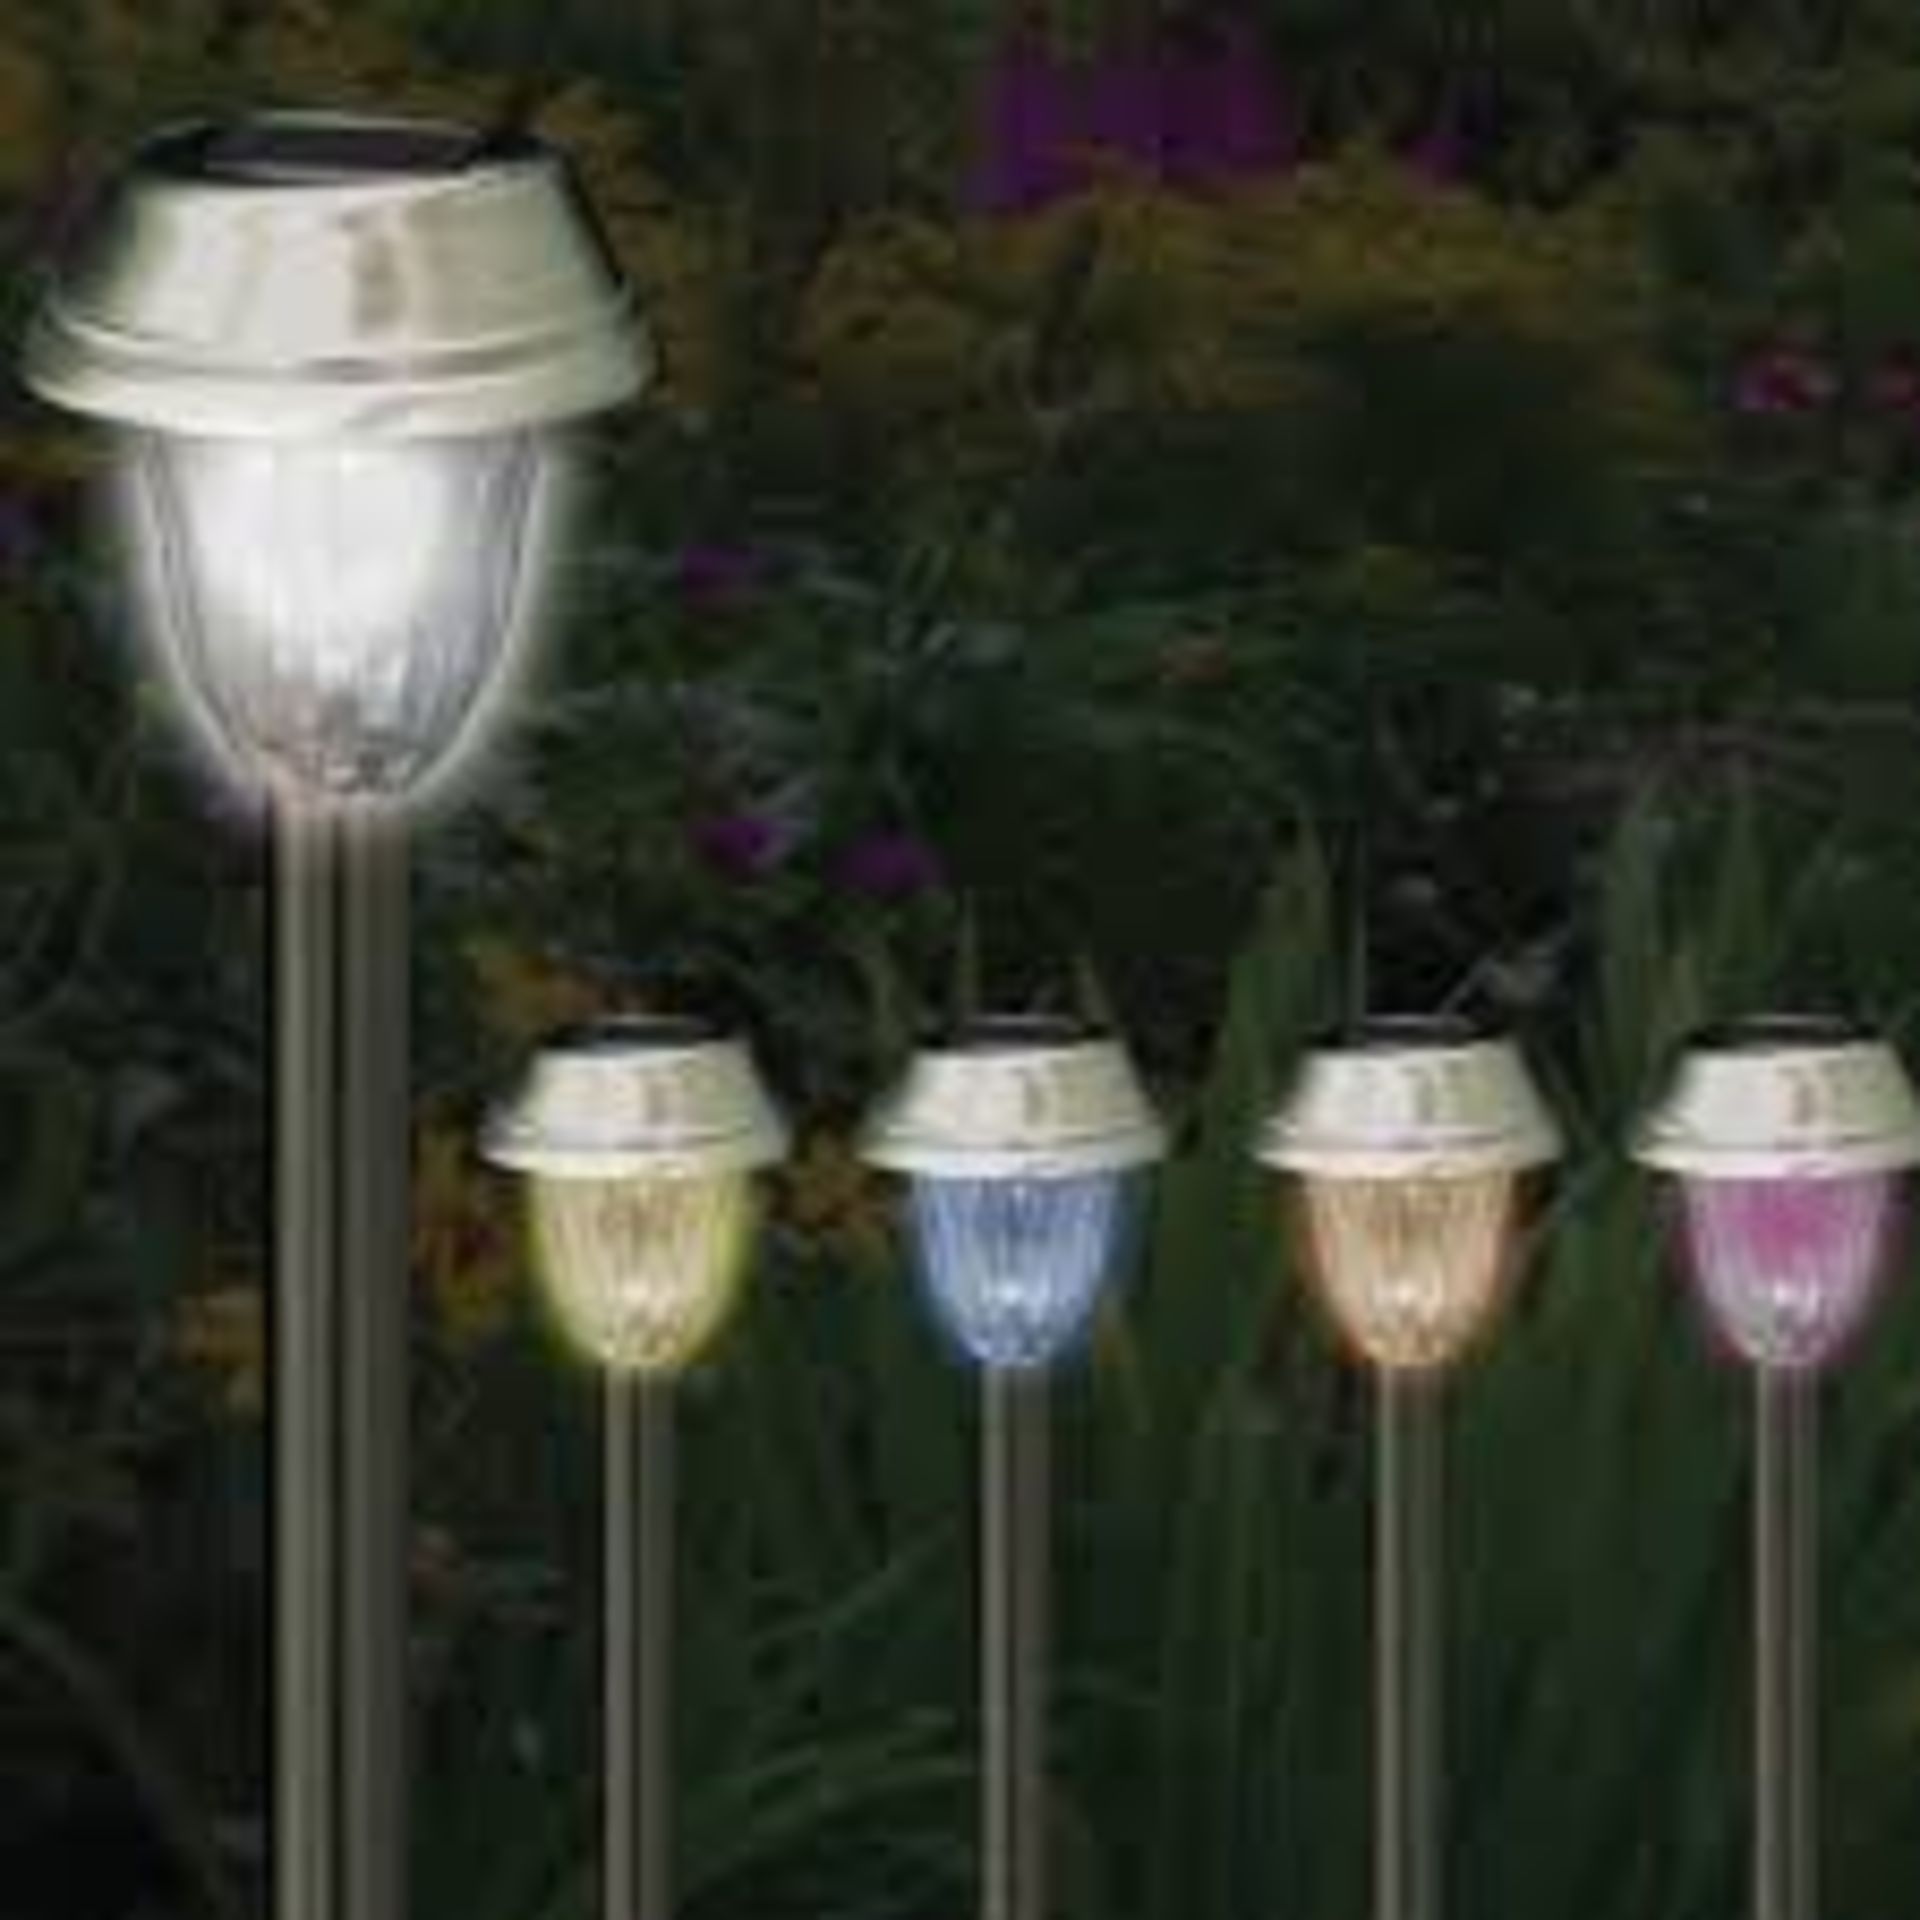 V Brand New Set Of Four Solar Power Path Lights with red/blue/green switchable colours SRP £19.99